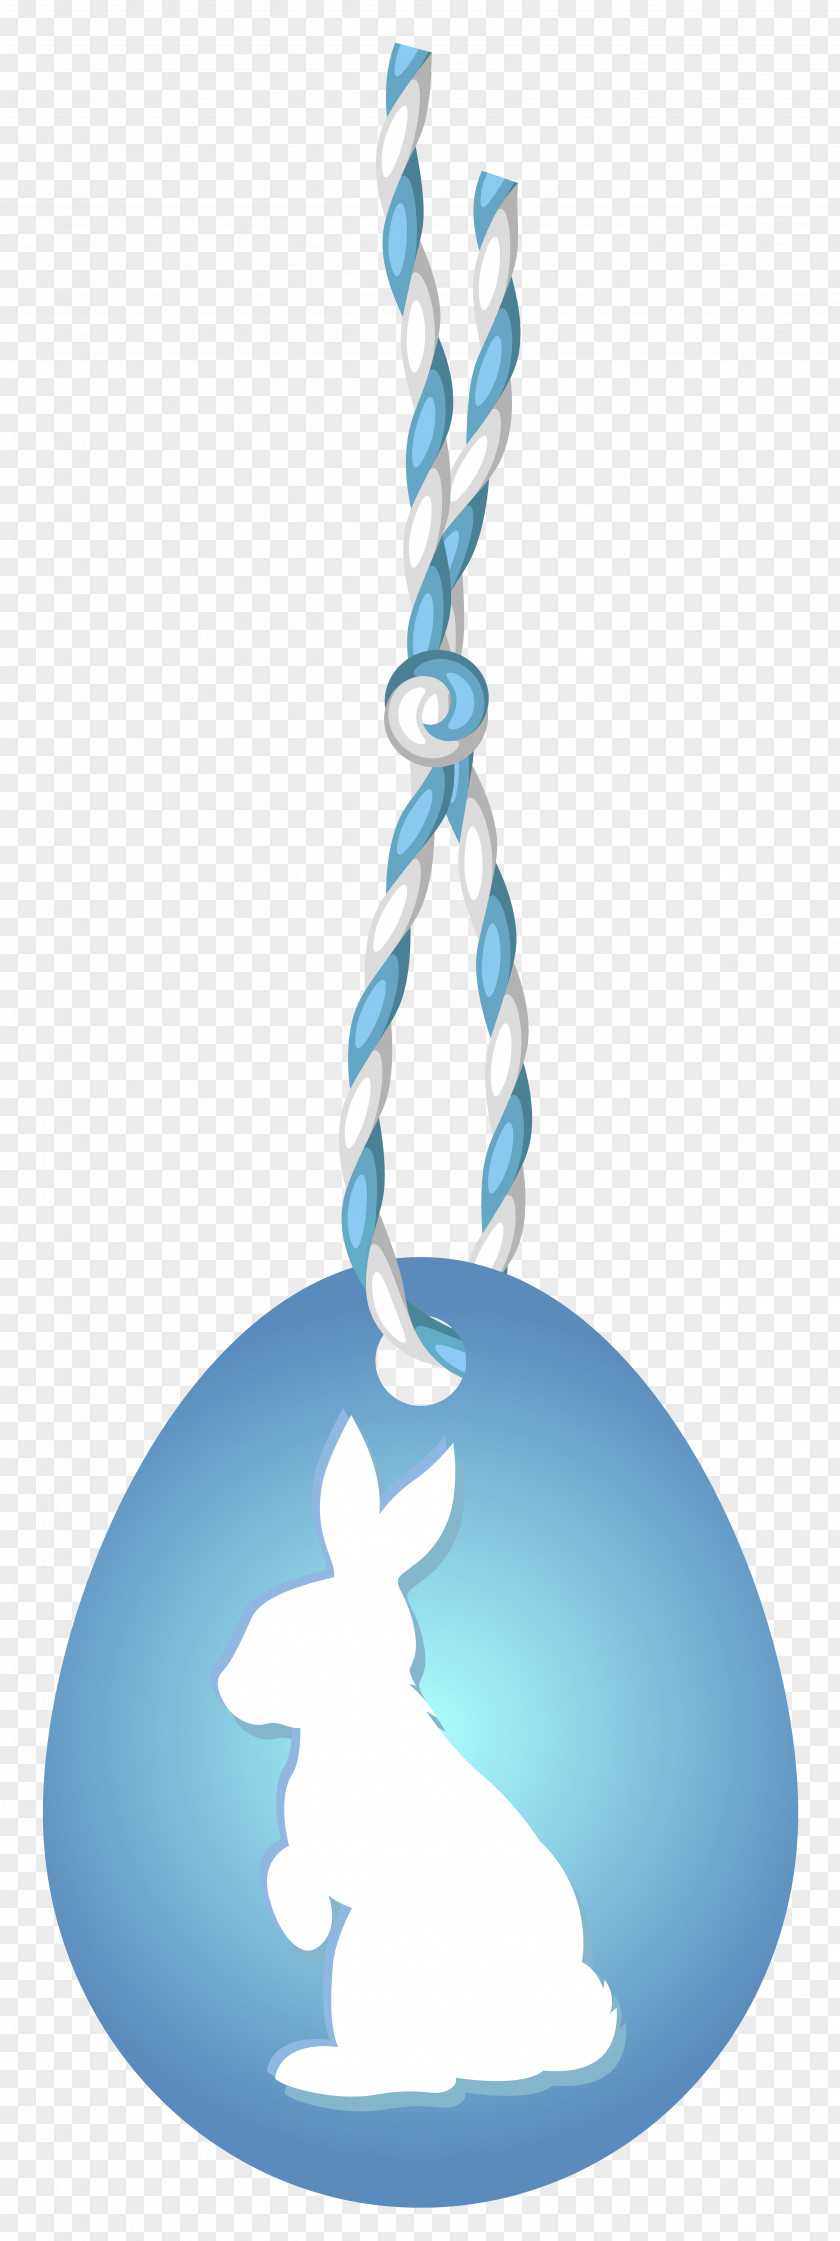 Blue Easter Hanging Egg With Bunny Clip Art Image PNG